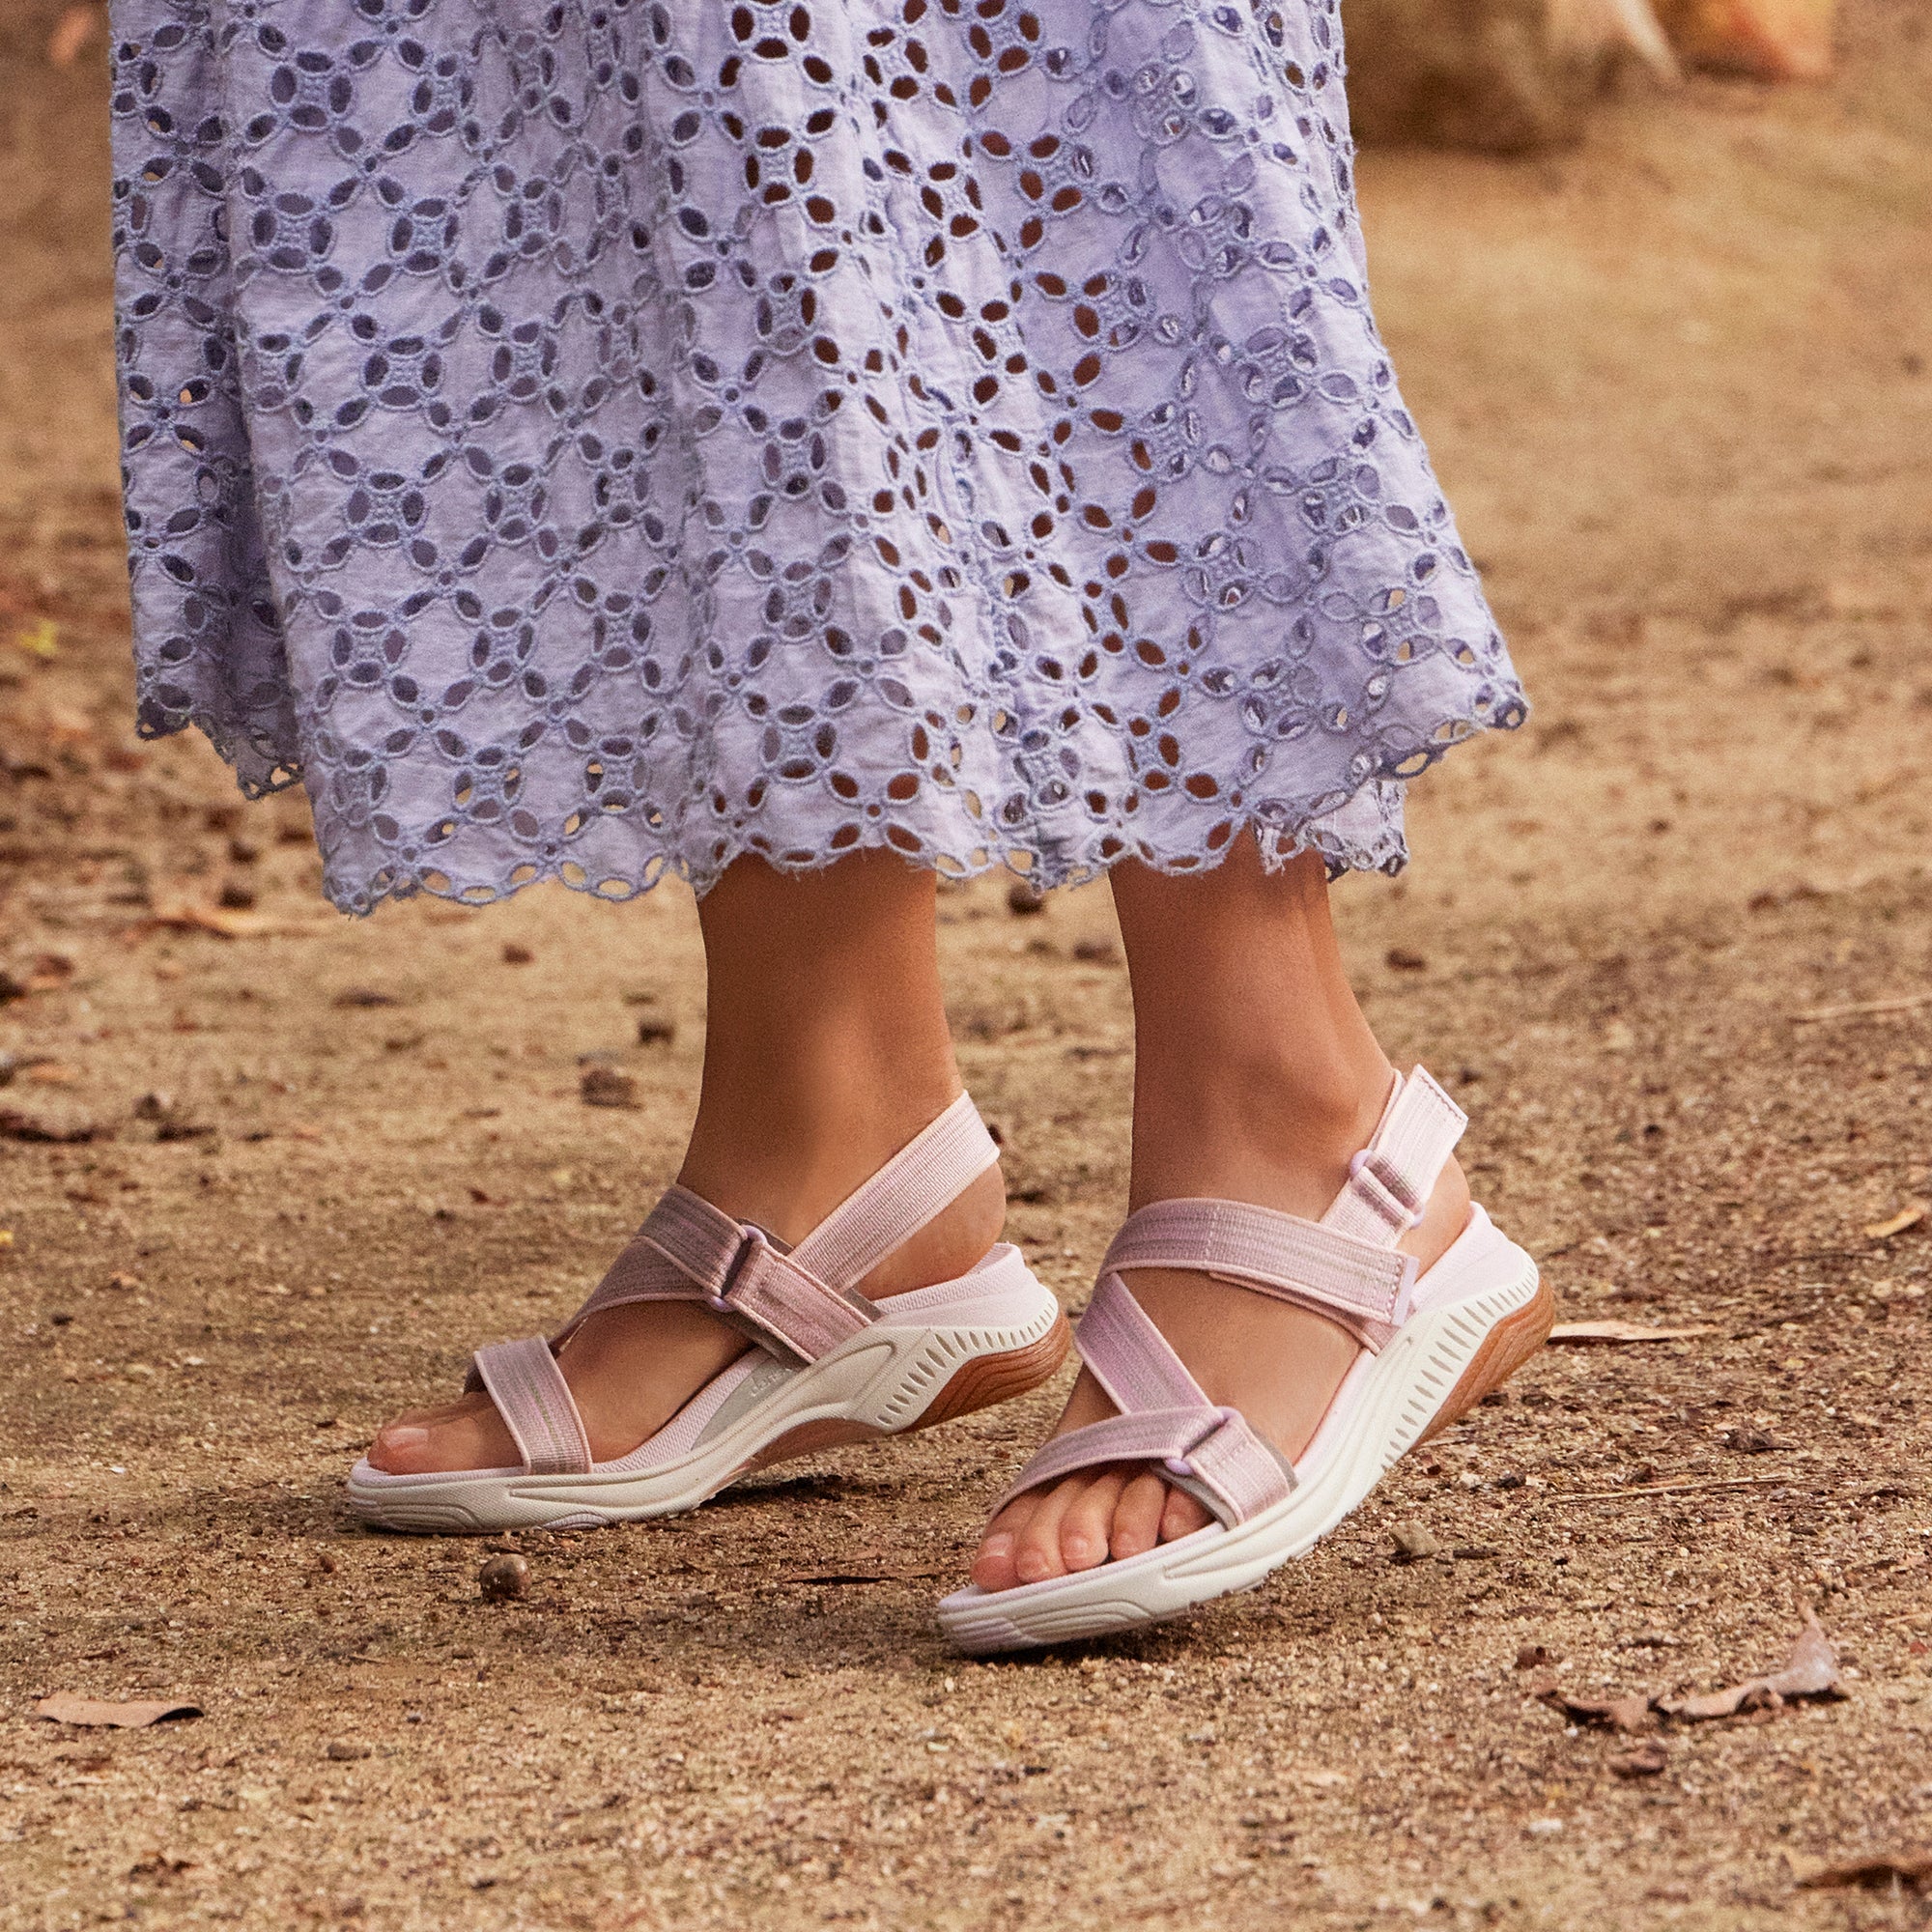 A close shot of pink and white walking sandals on a dirt path.